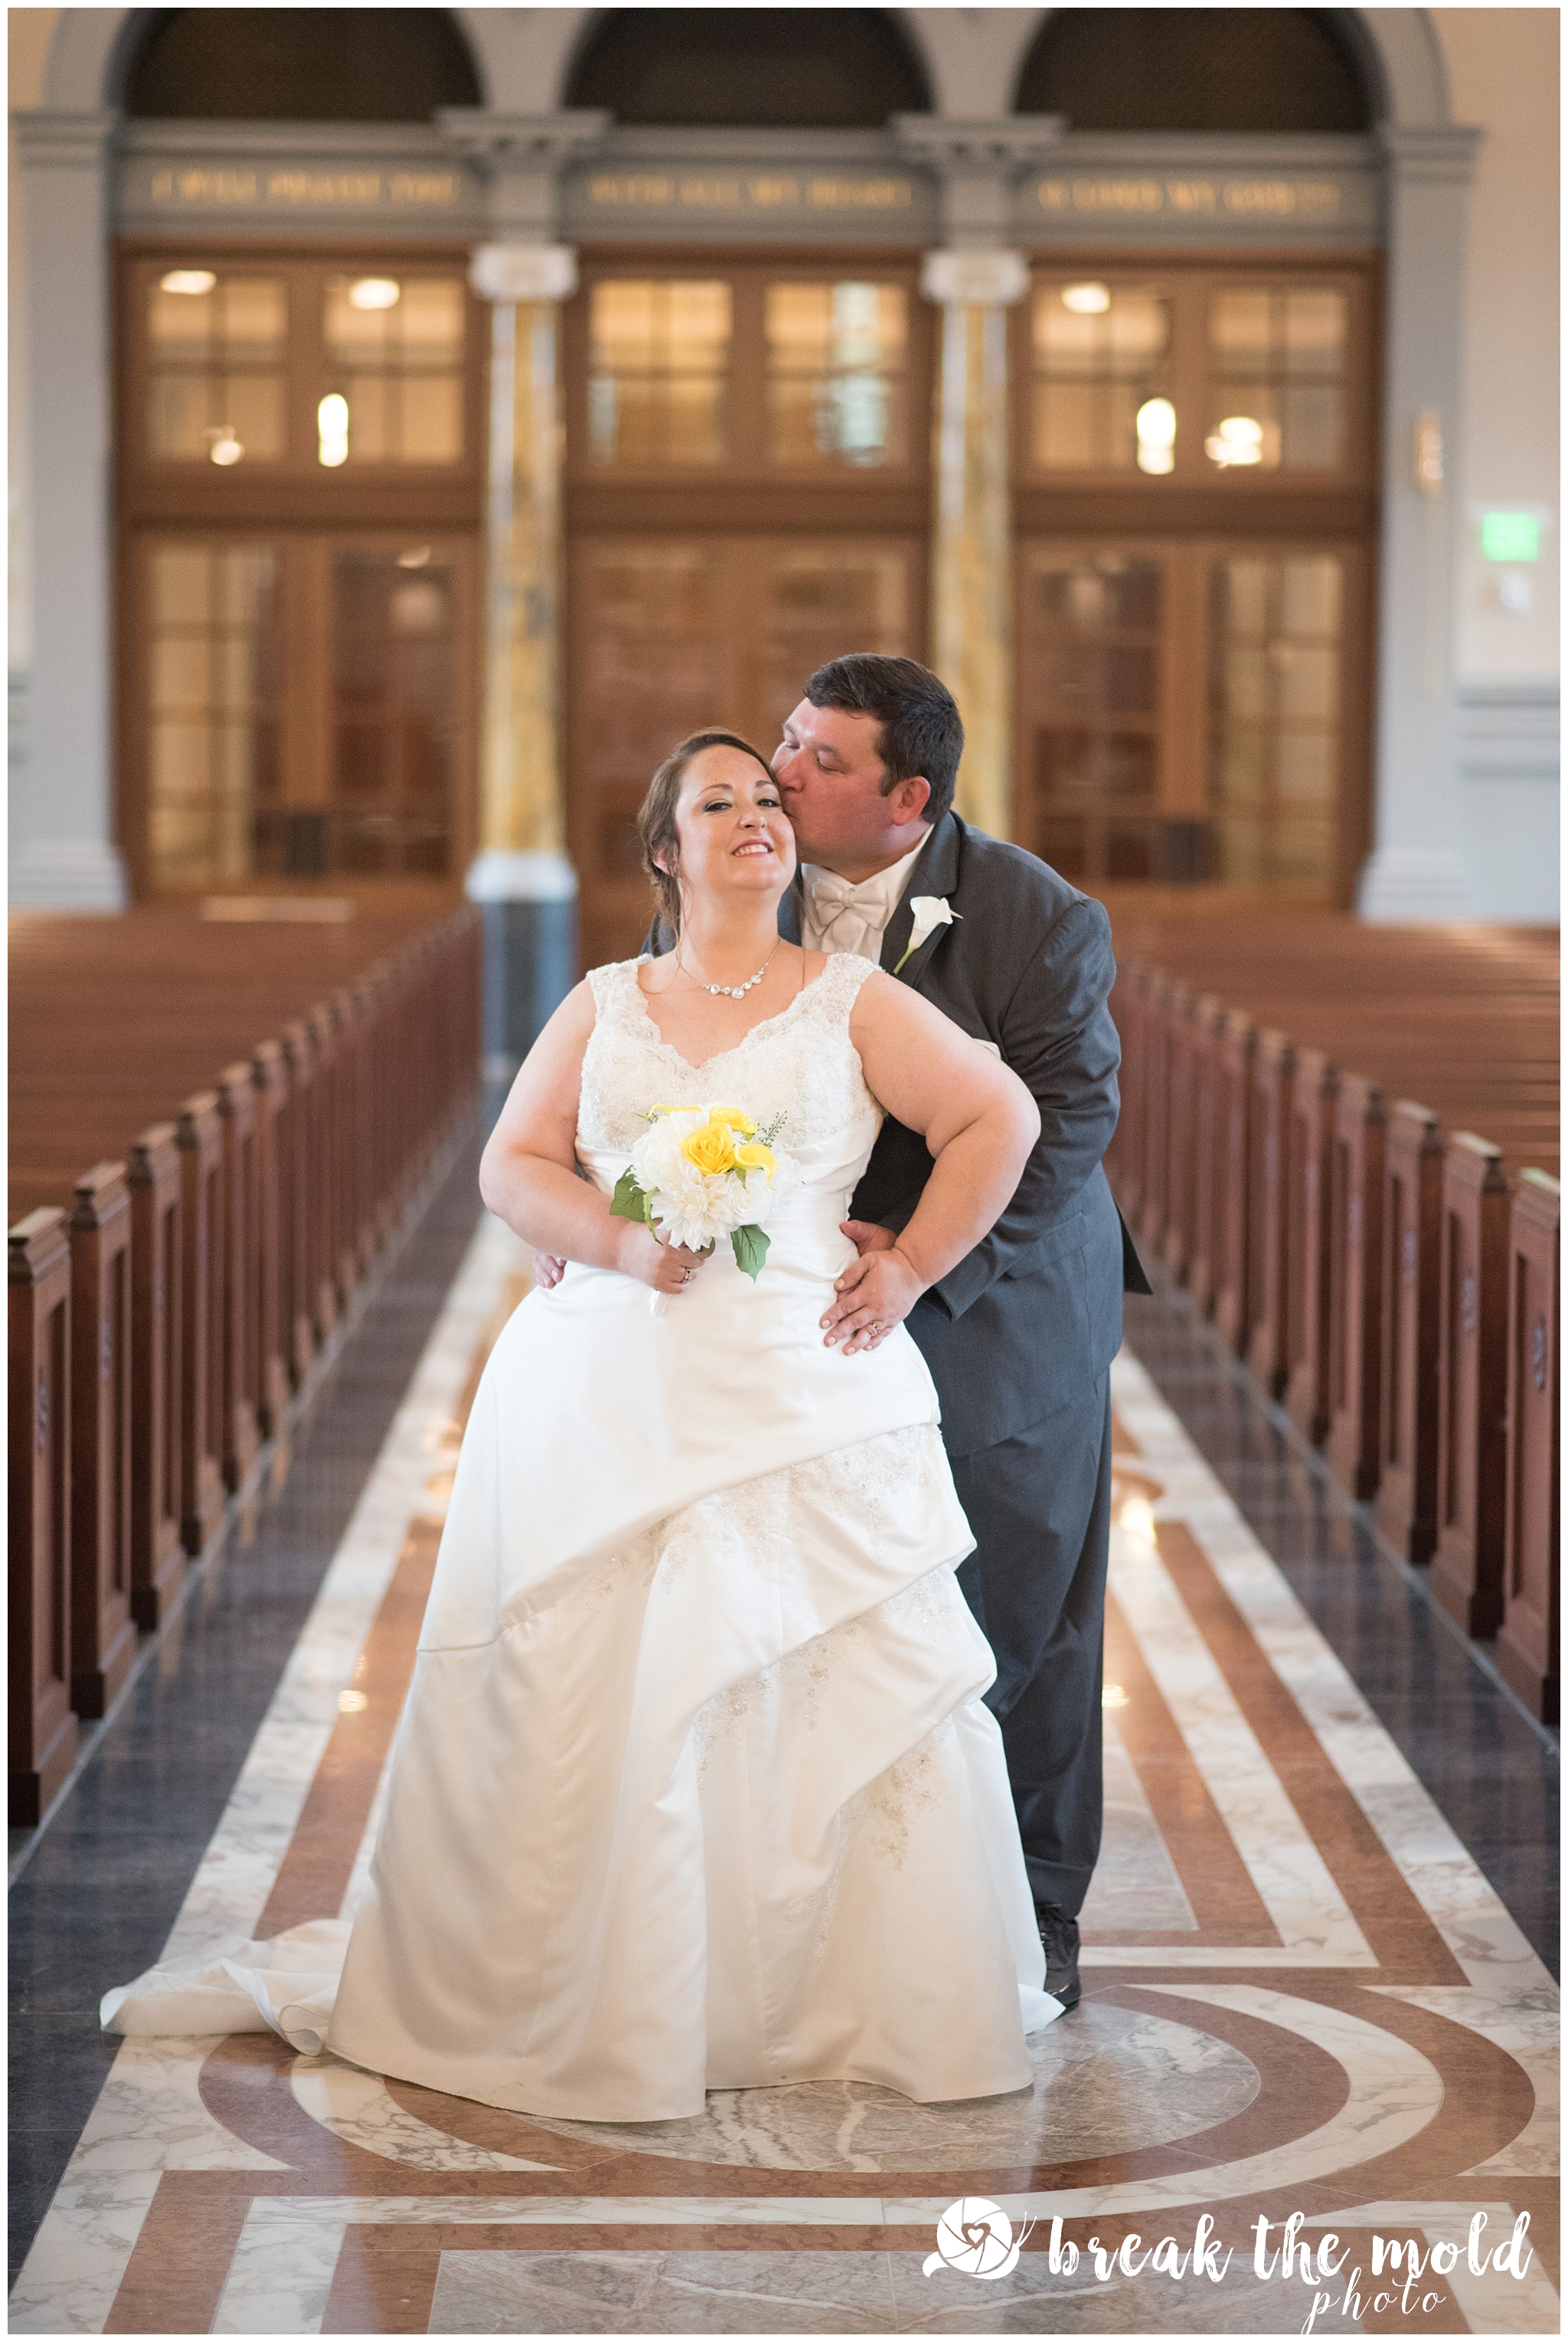 wedding-knoxville-sacred-heart-cathedral-photographer-break-the-mold-photo-feature-affordable_0819.jpg